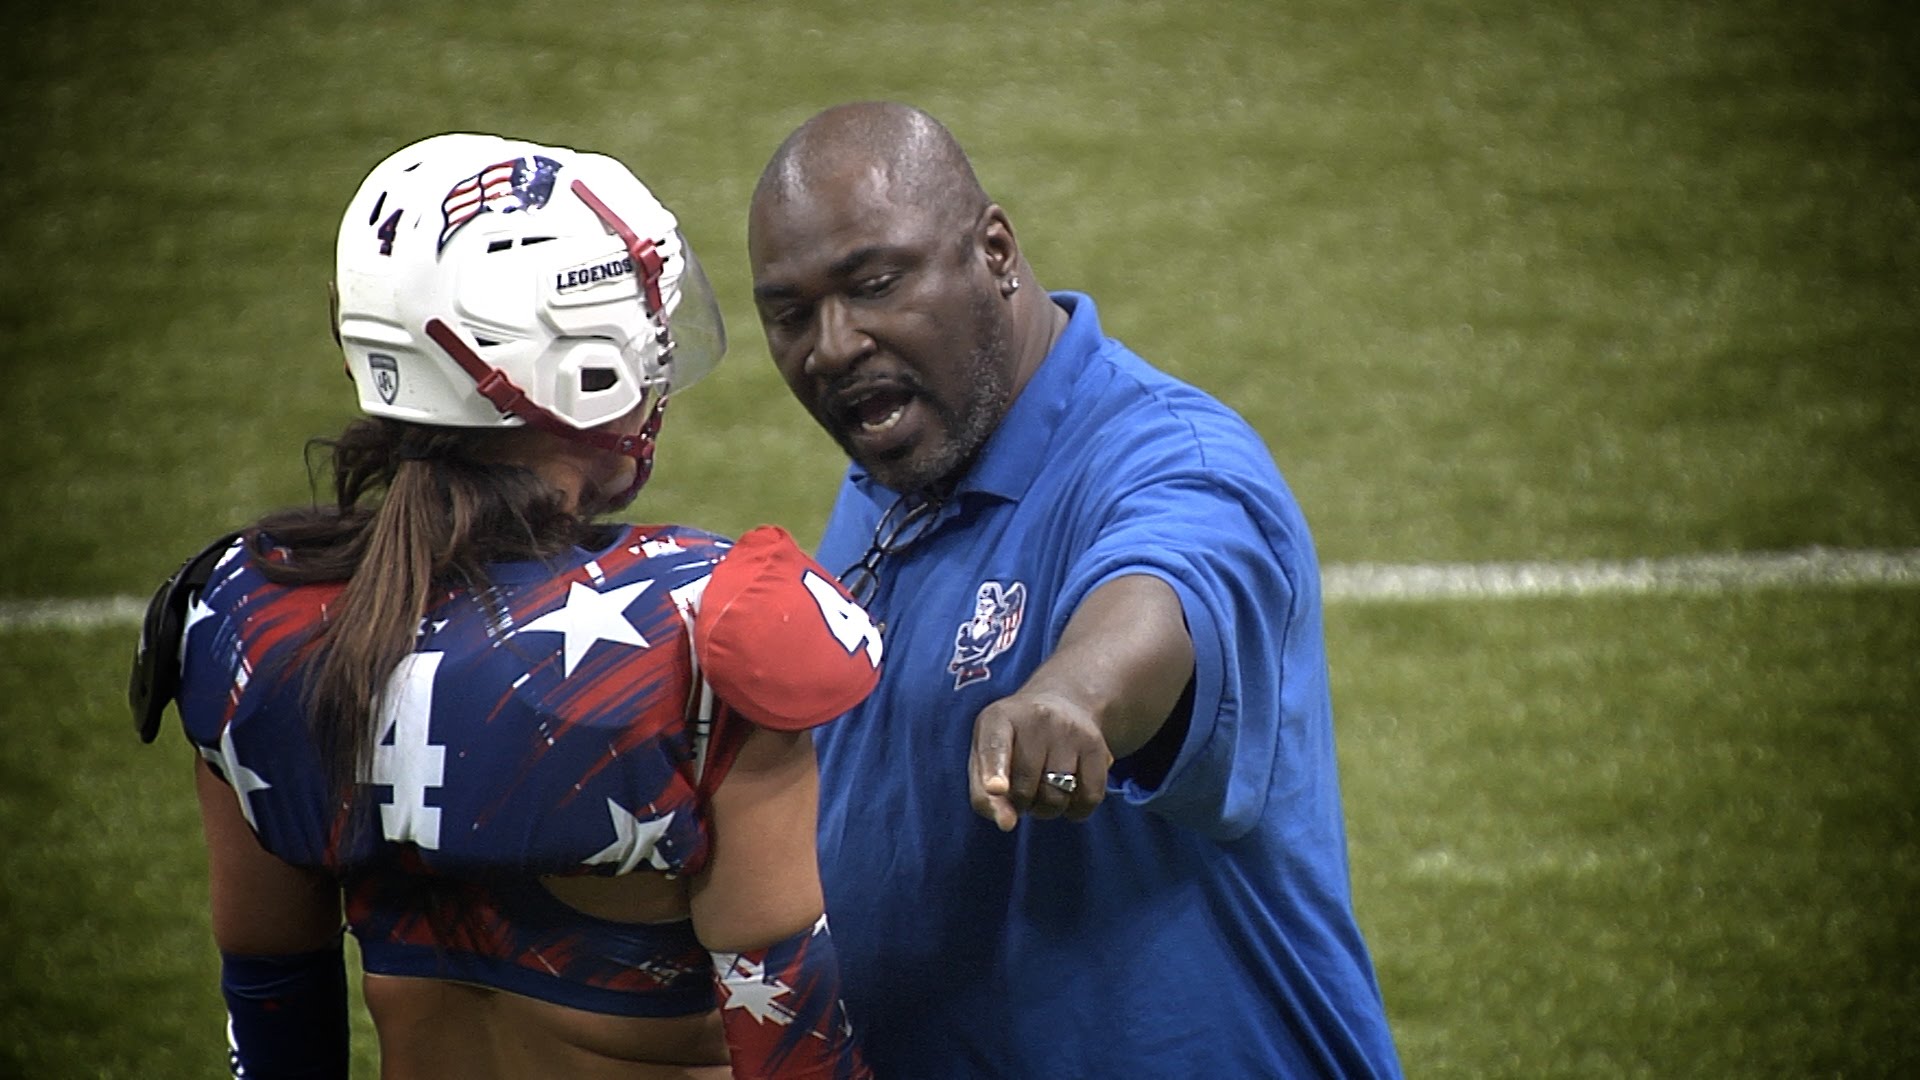 LFL Coach tells player to "Punch that Bitch in the Goddamn ...